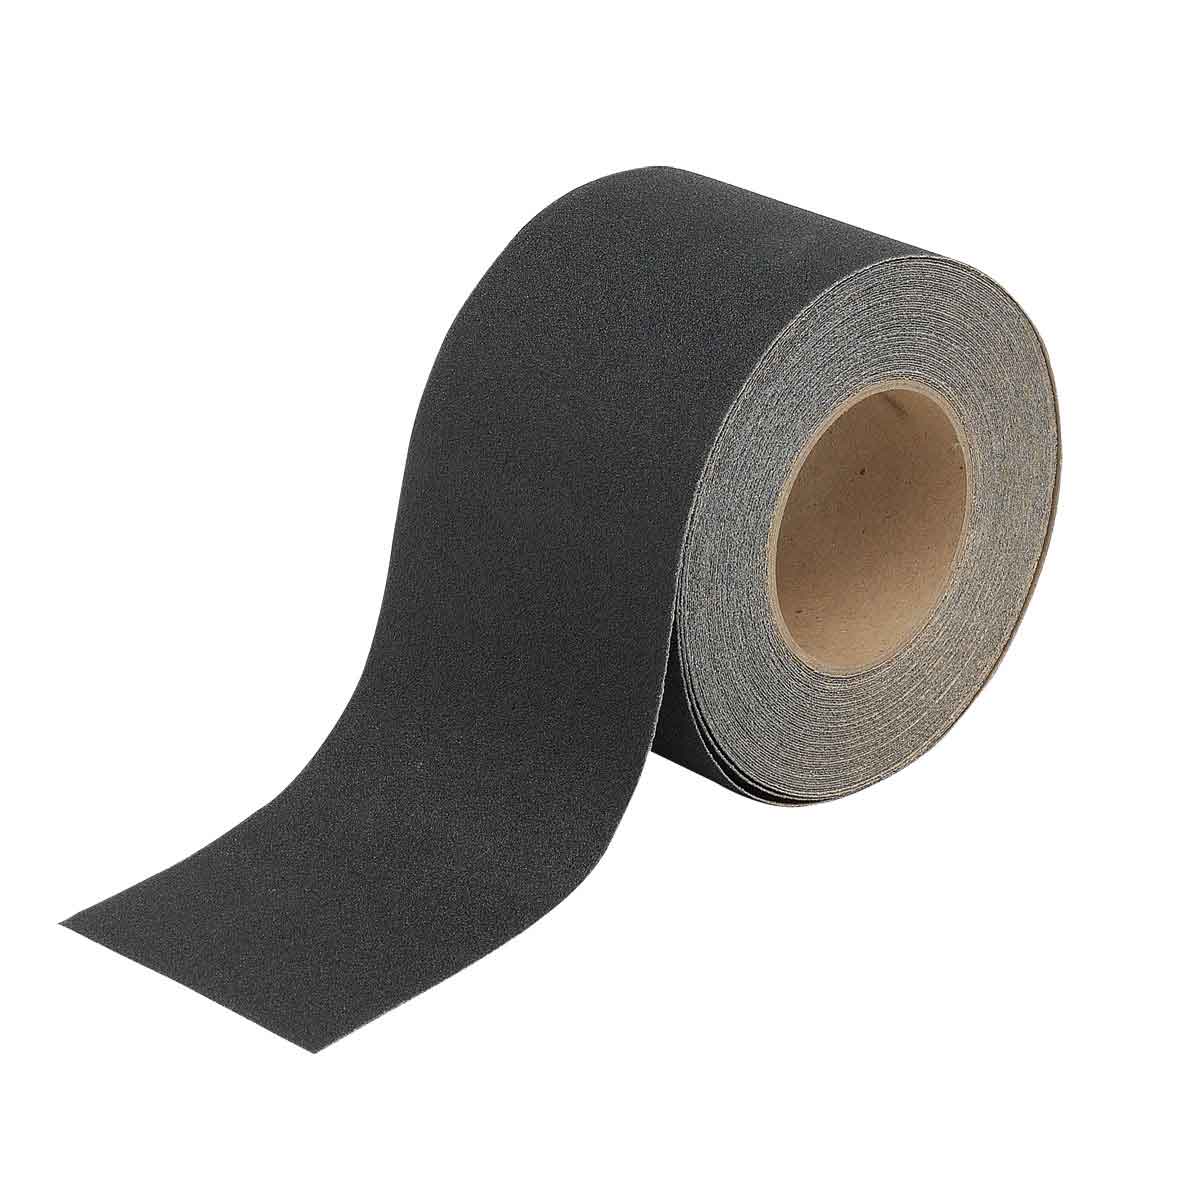 Brady® 78190 Laminated Non-Reflective Anti-Skid Tape Roll, 60 ft L x 2 in W x 0.026 in THK, B-916 Polyester/Aluminum Oxide Grit, Solid Surface Pattern